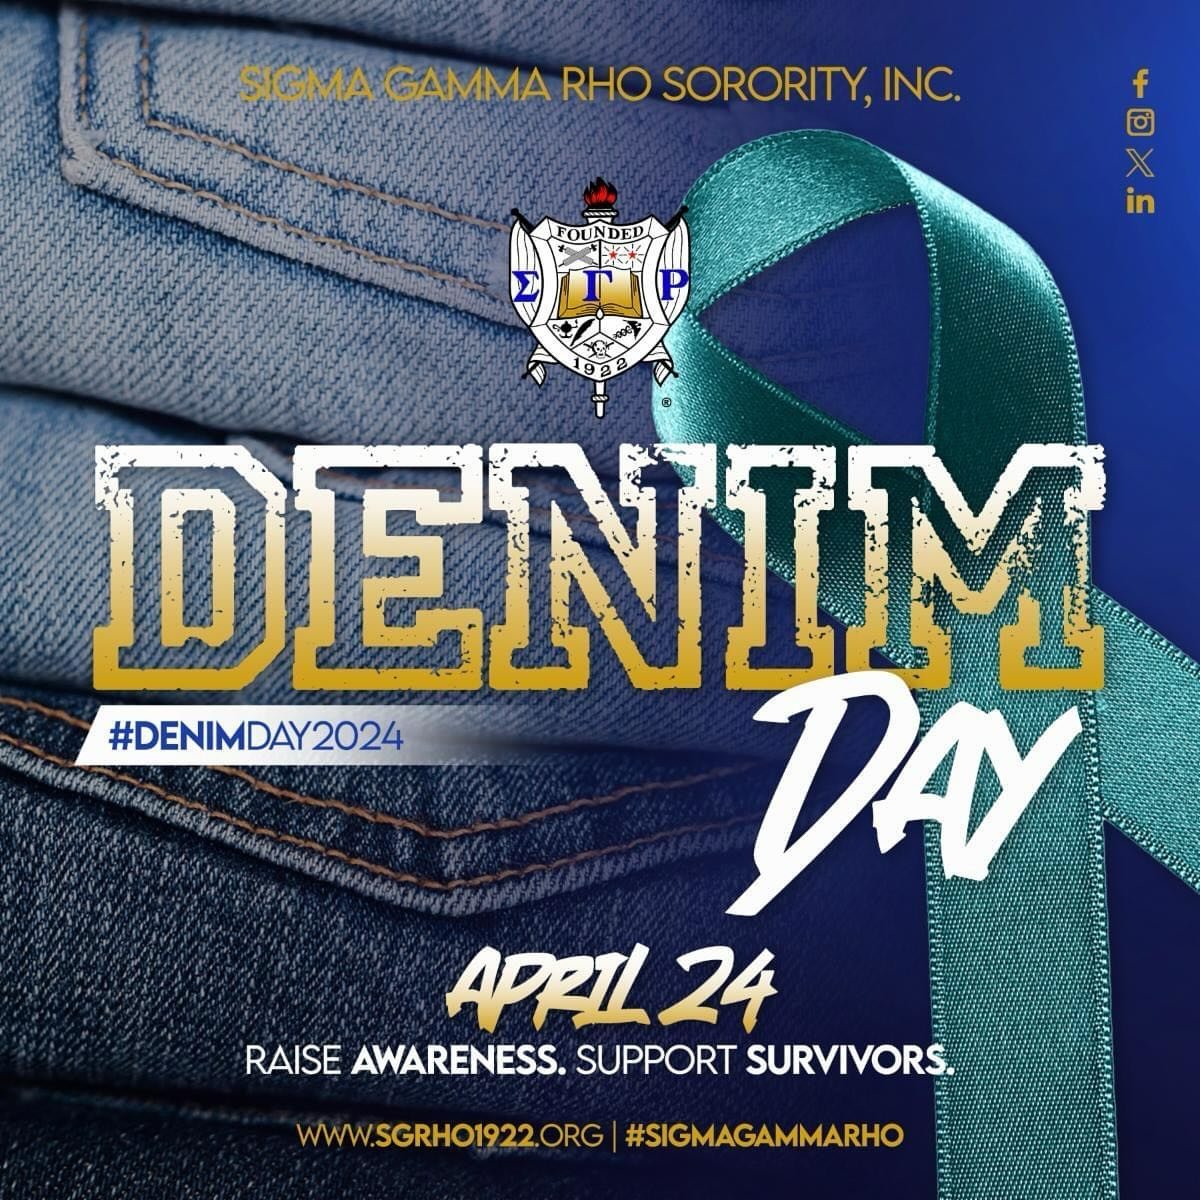 Sigma Gamma Rho Sorority, Inc. is proud to be a part of the 25th Denim Day recognition. Denim Day is a day of action in order to raise awareness about Sexual Assault and Victim Blaming during Sexual Awareness Month.

#SigmaGammaRho #GreaterWomenGreat